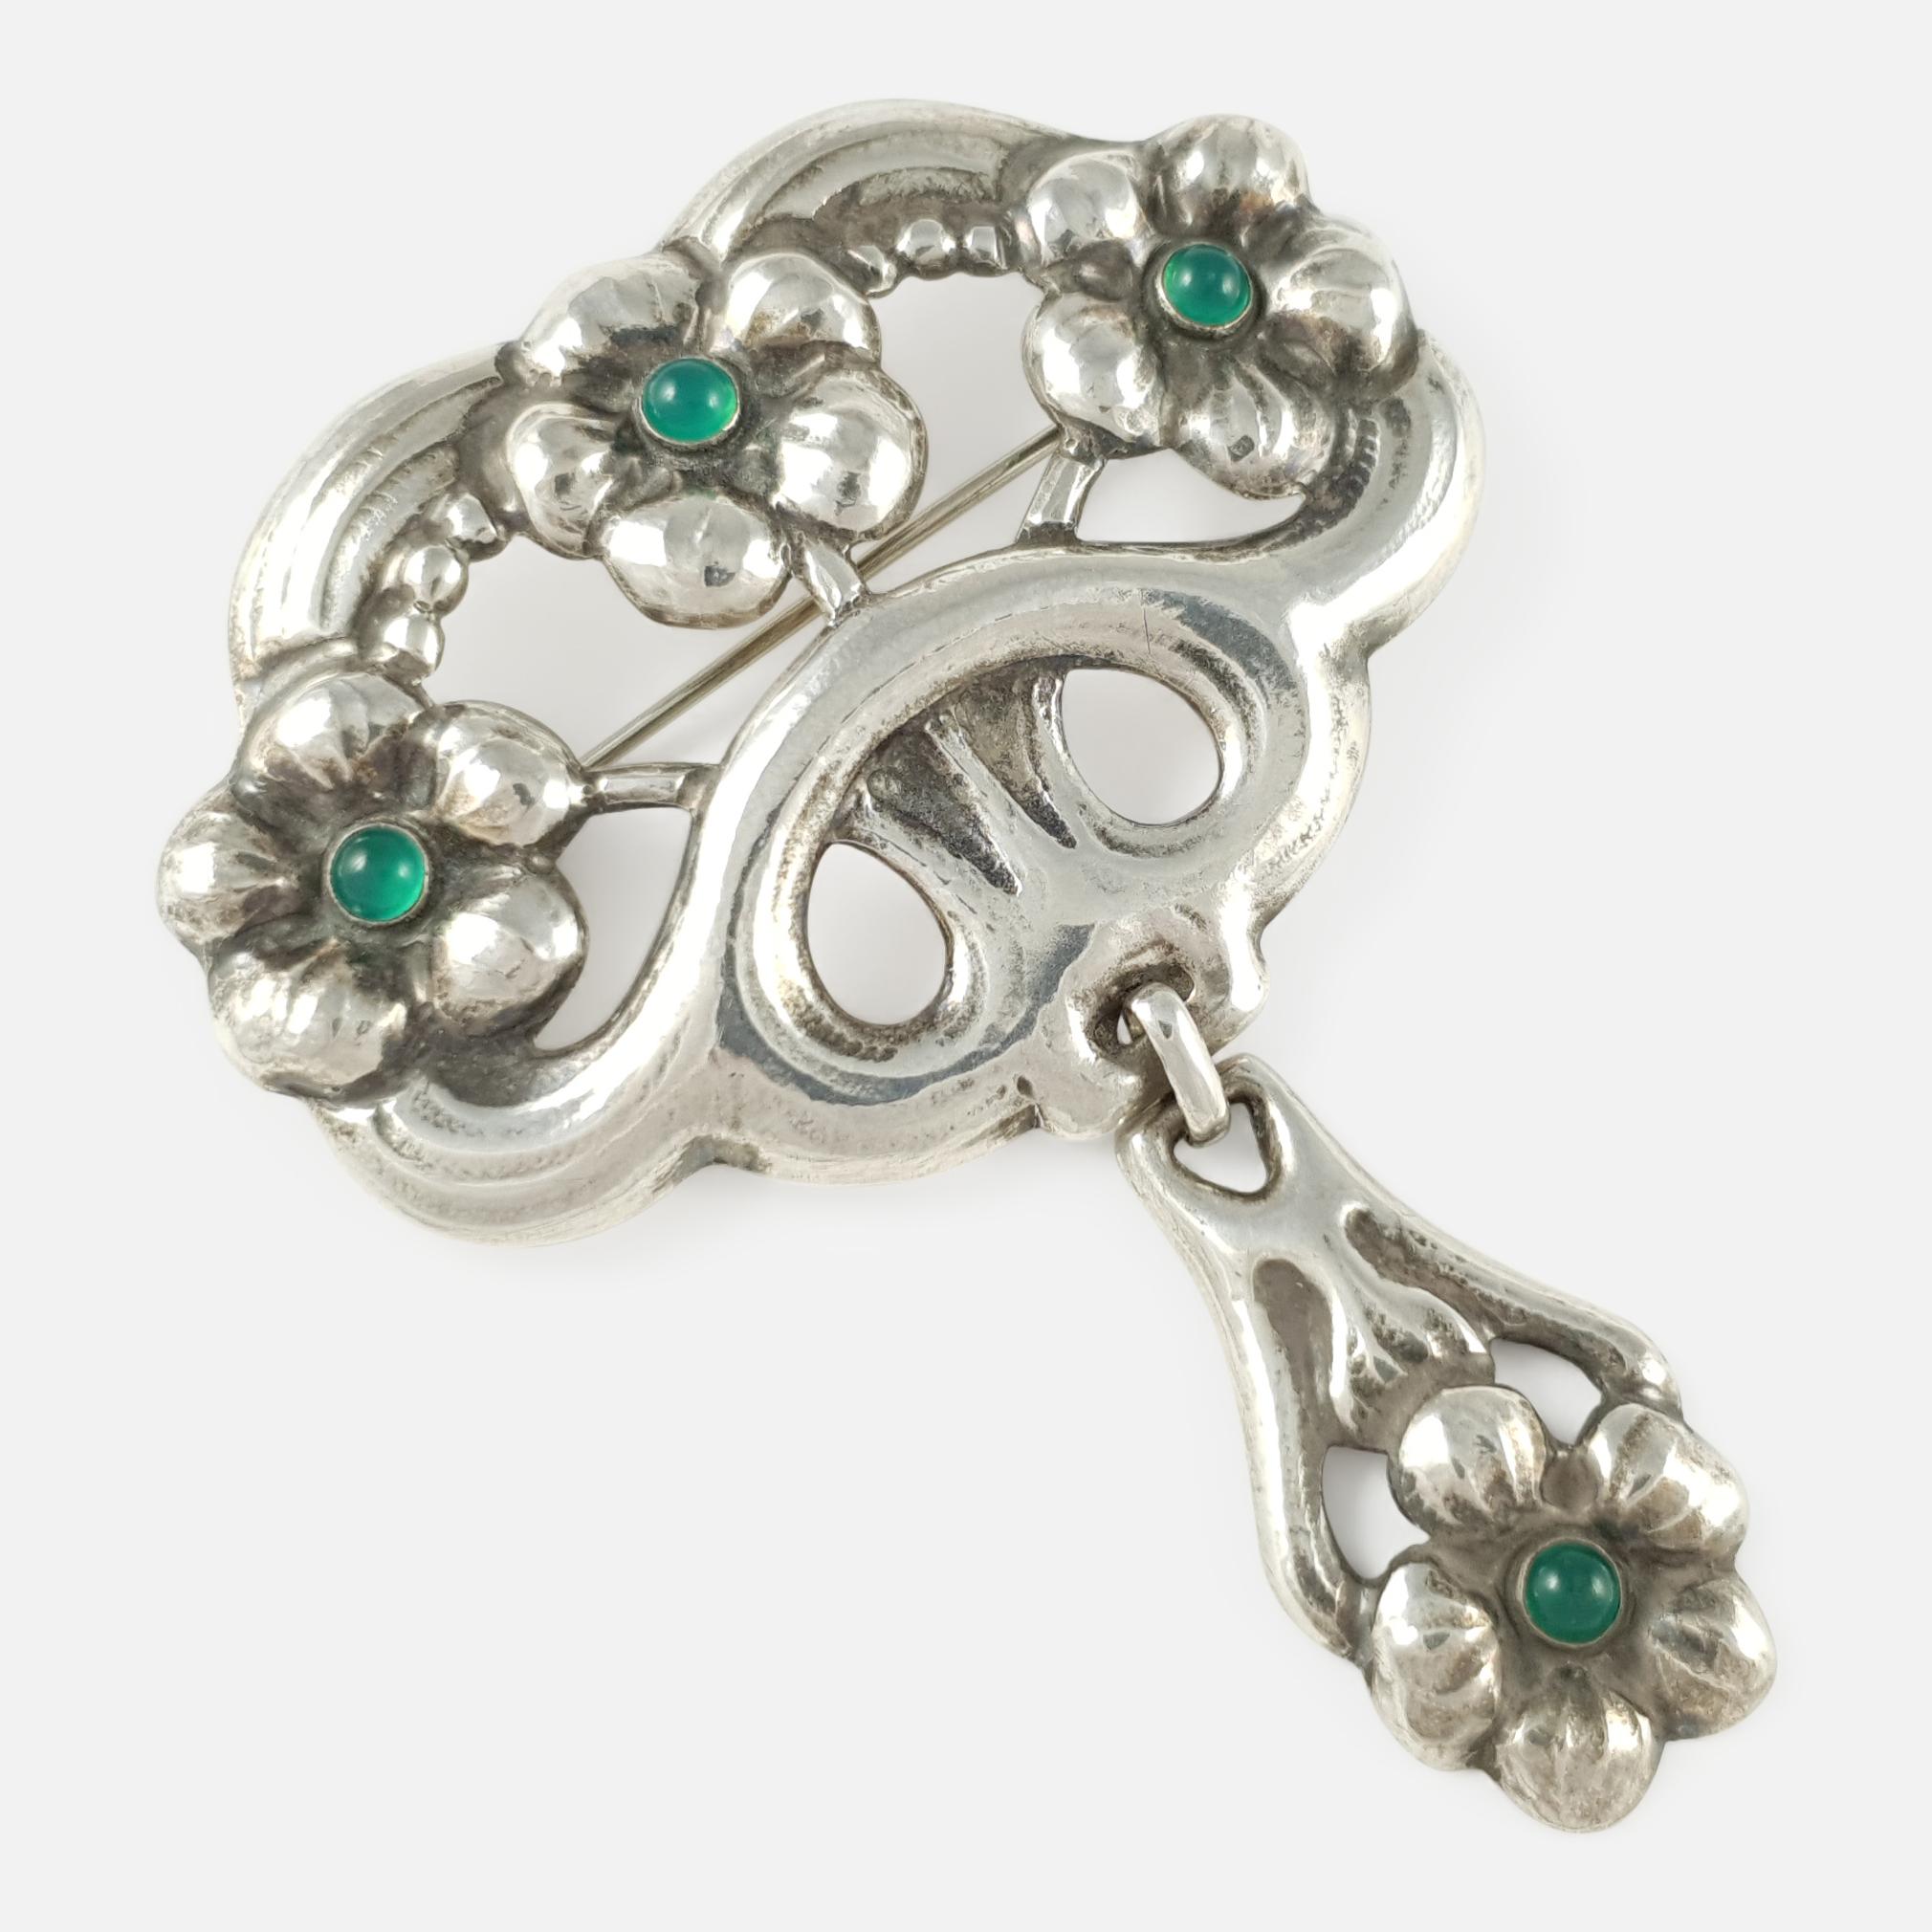 An antique Danish Skønvirke silver & green cabochon cut chrysoprase brooch by William Fuglede - circa 1915. The brooch is stamped with the makers mark 'WmF', & '830'. William Fuglede was a well known maker of Skønvirke (Danish Arts & Crafts